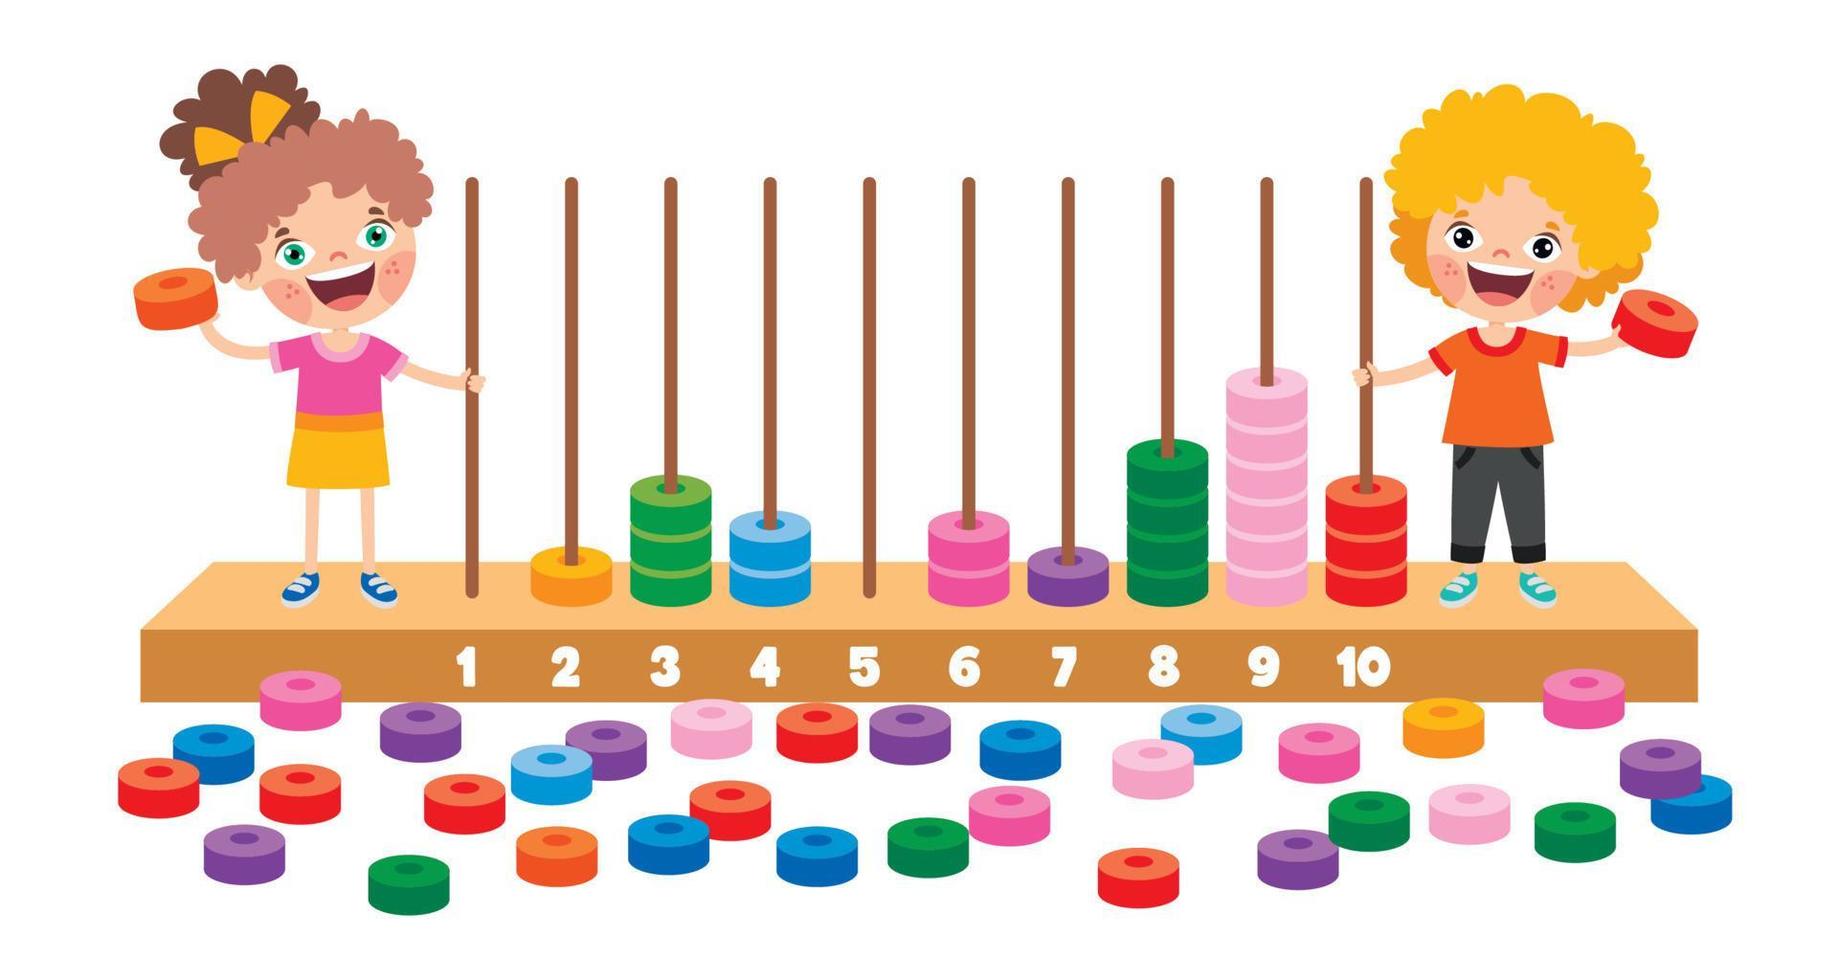 Abacus Toy For Children Education vector